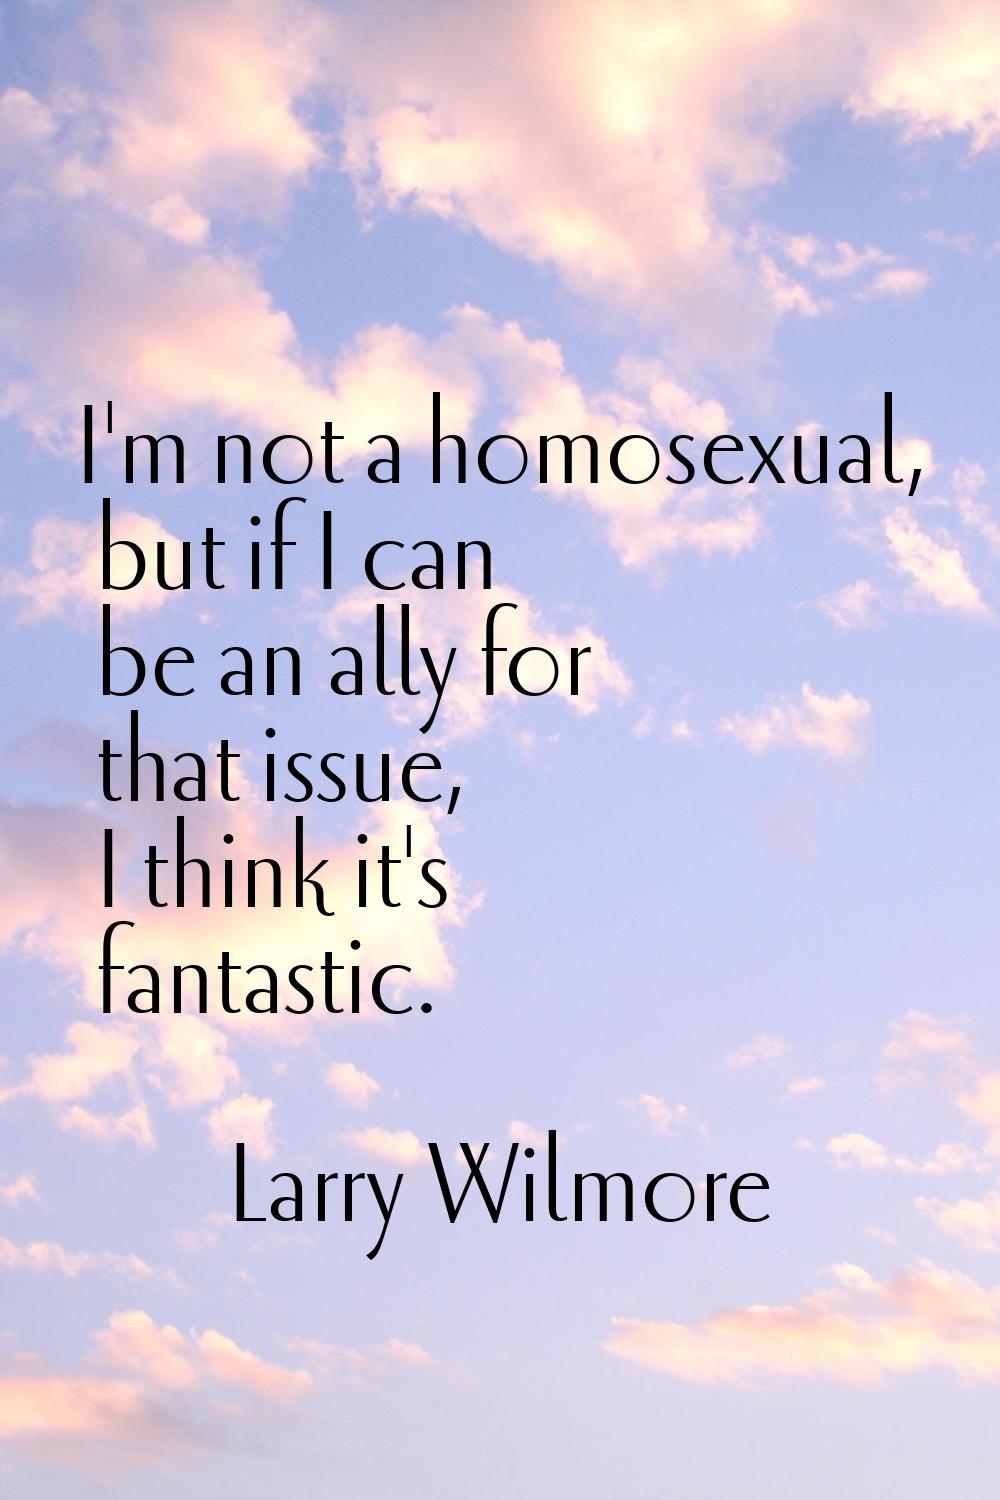 I'm not a homosexual, but if I can be an ally for that issue, I think it's fantastic.